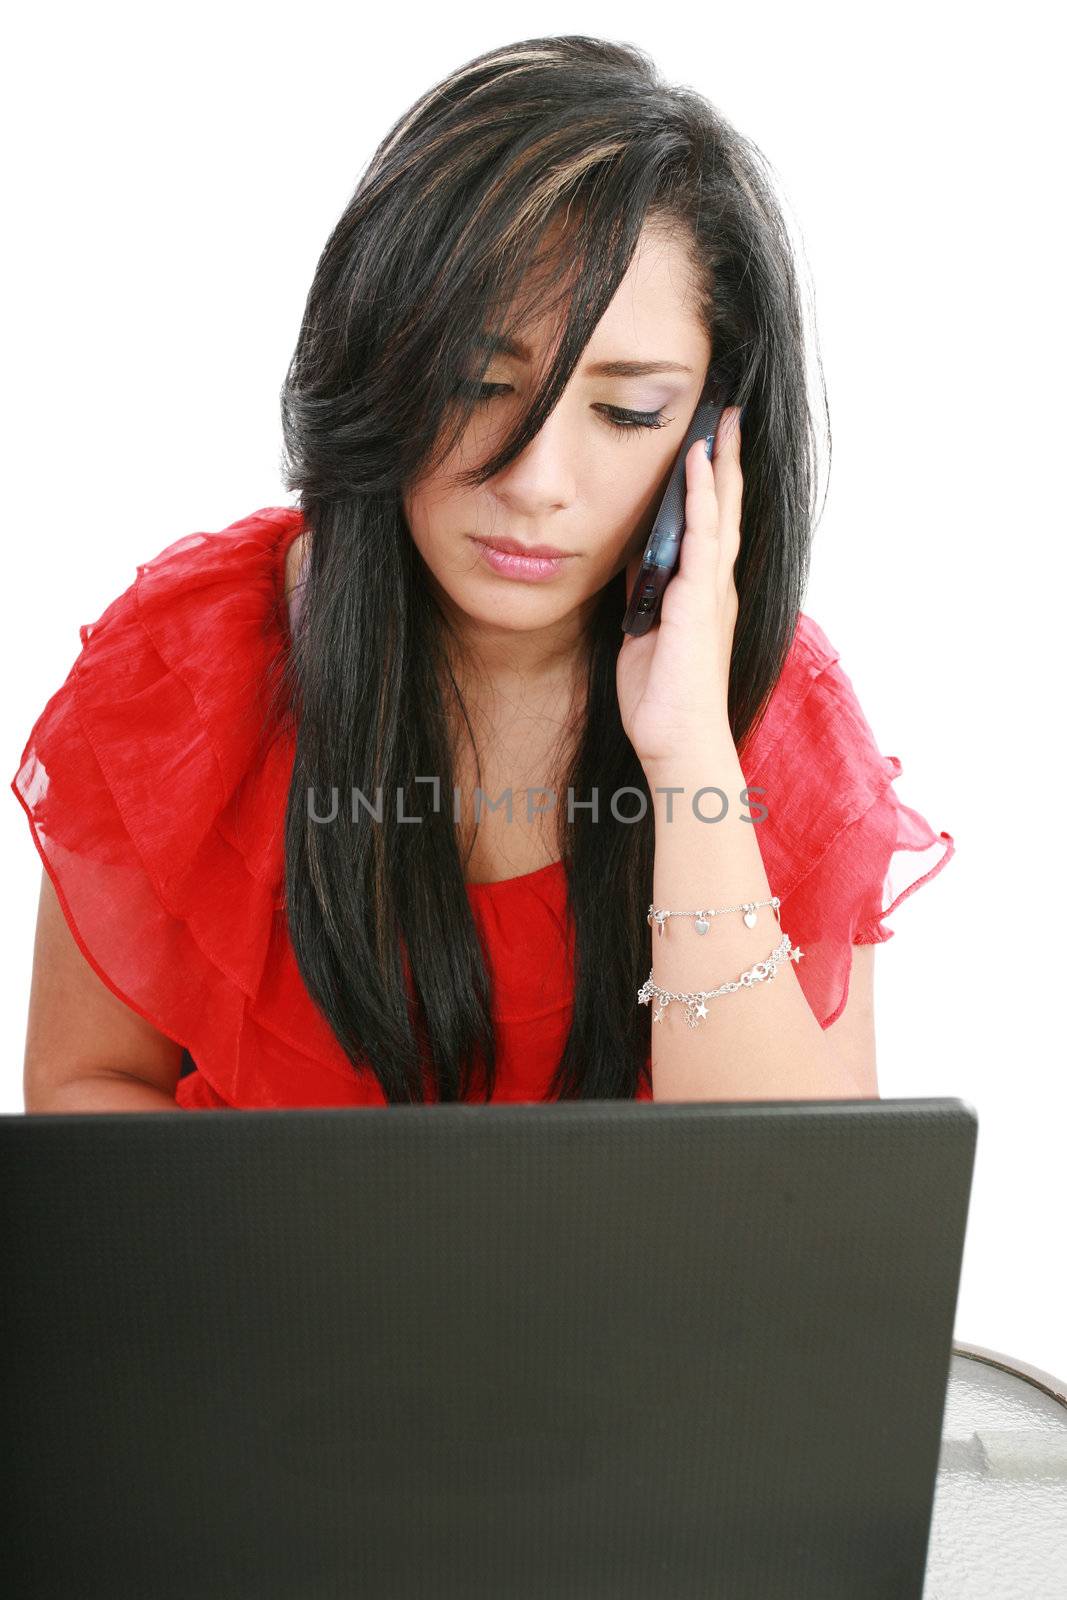 Serious business woman looking at laptop screen while talking on by dacasdo